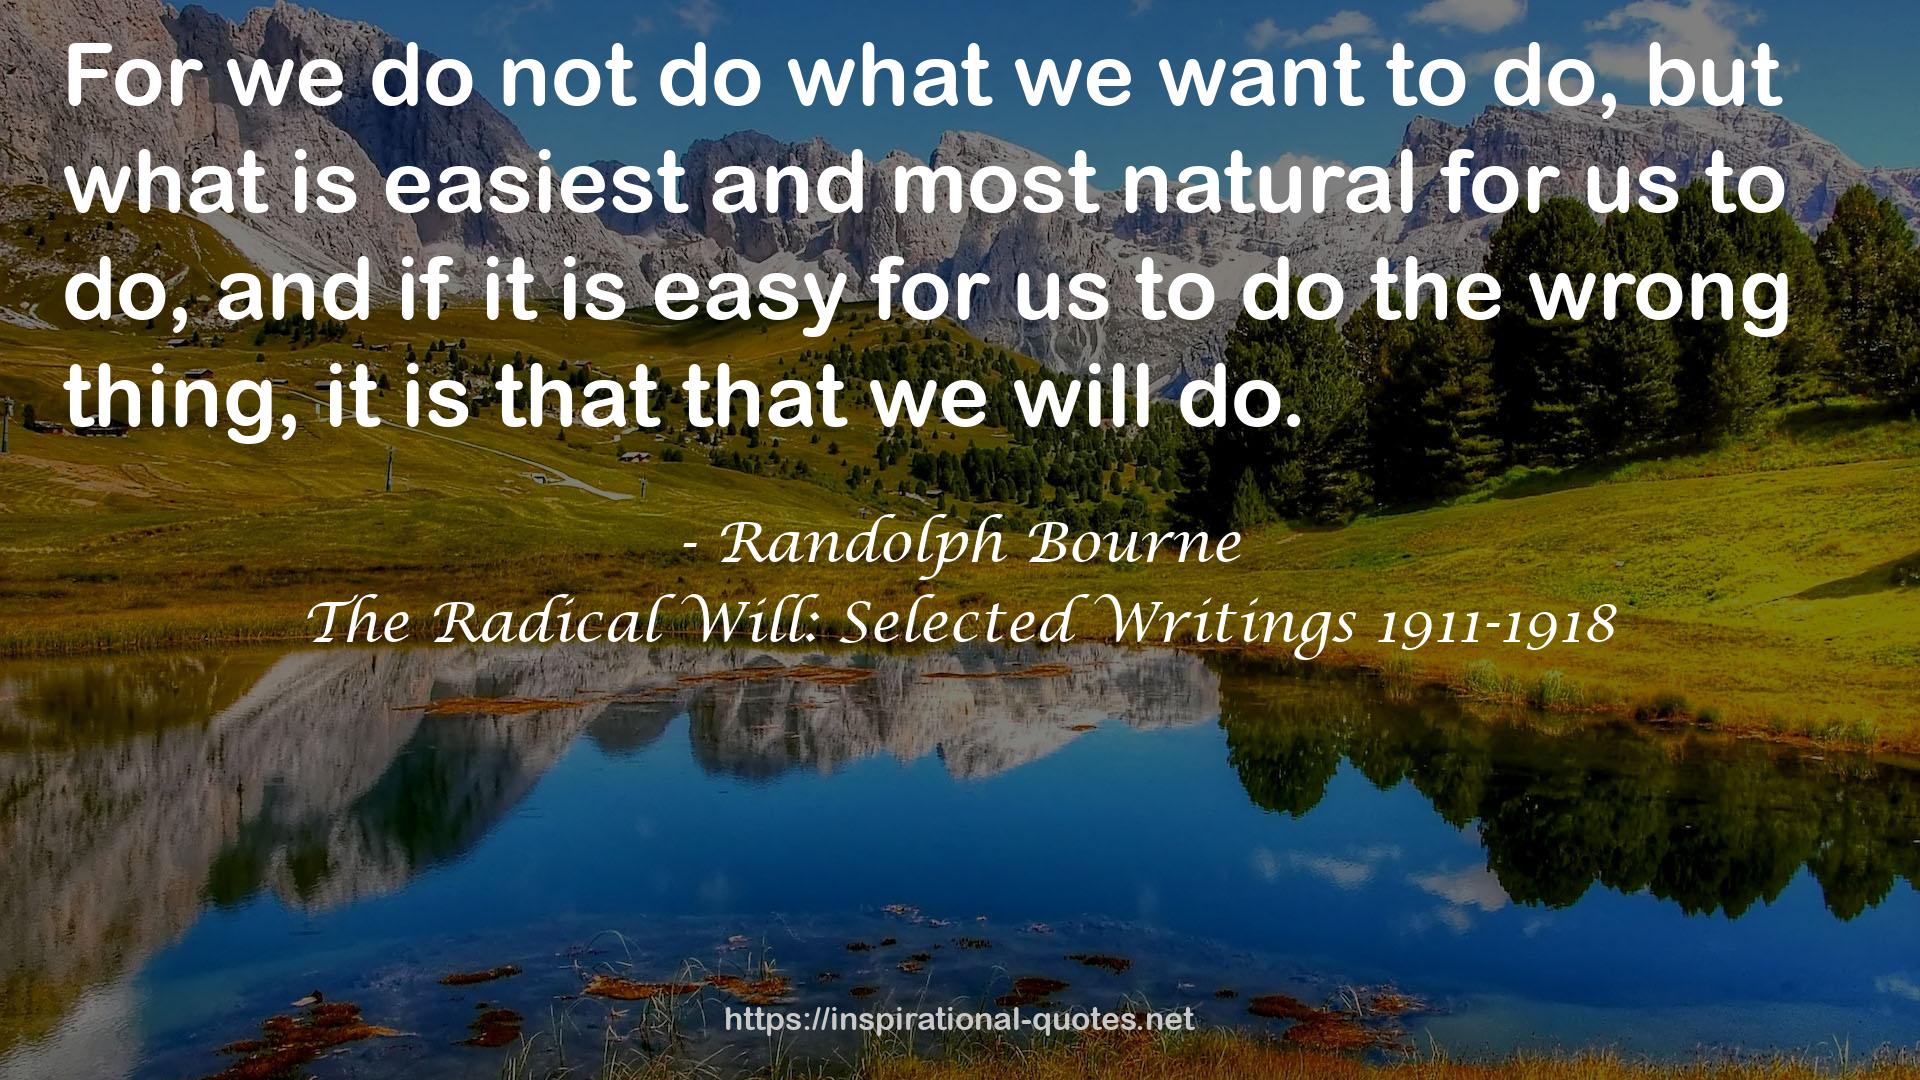 The Radical Will: Selected Writings 1911-1918 QUOTES